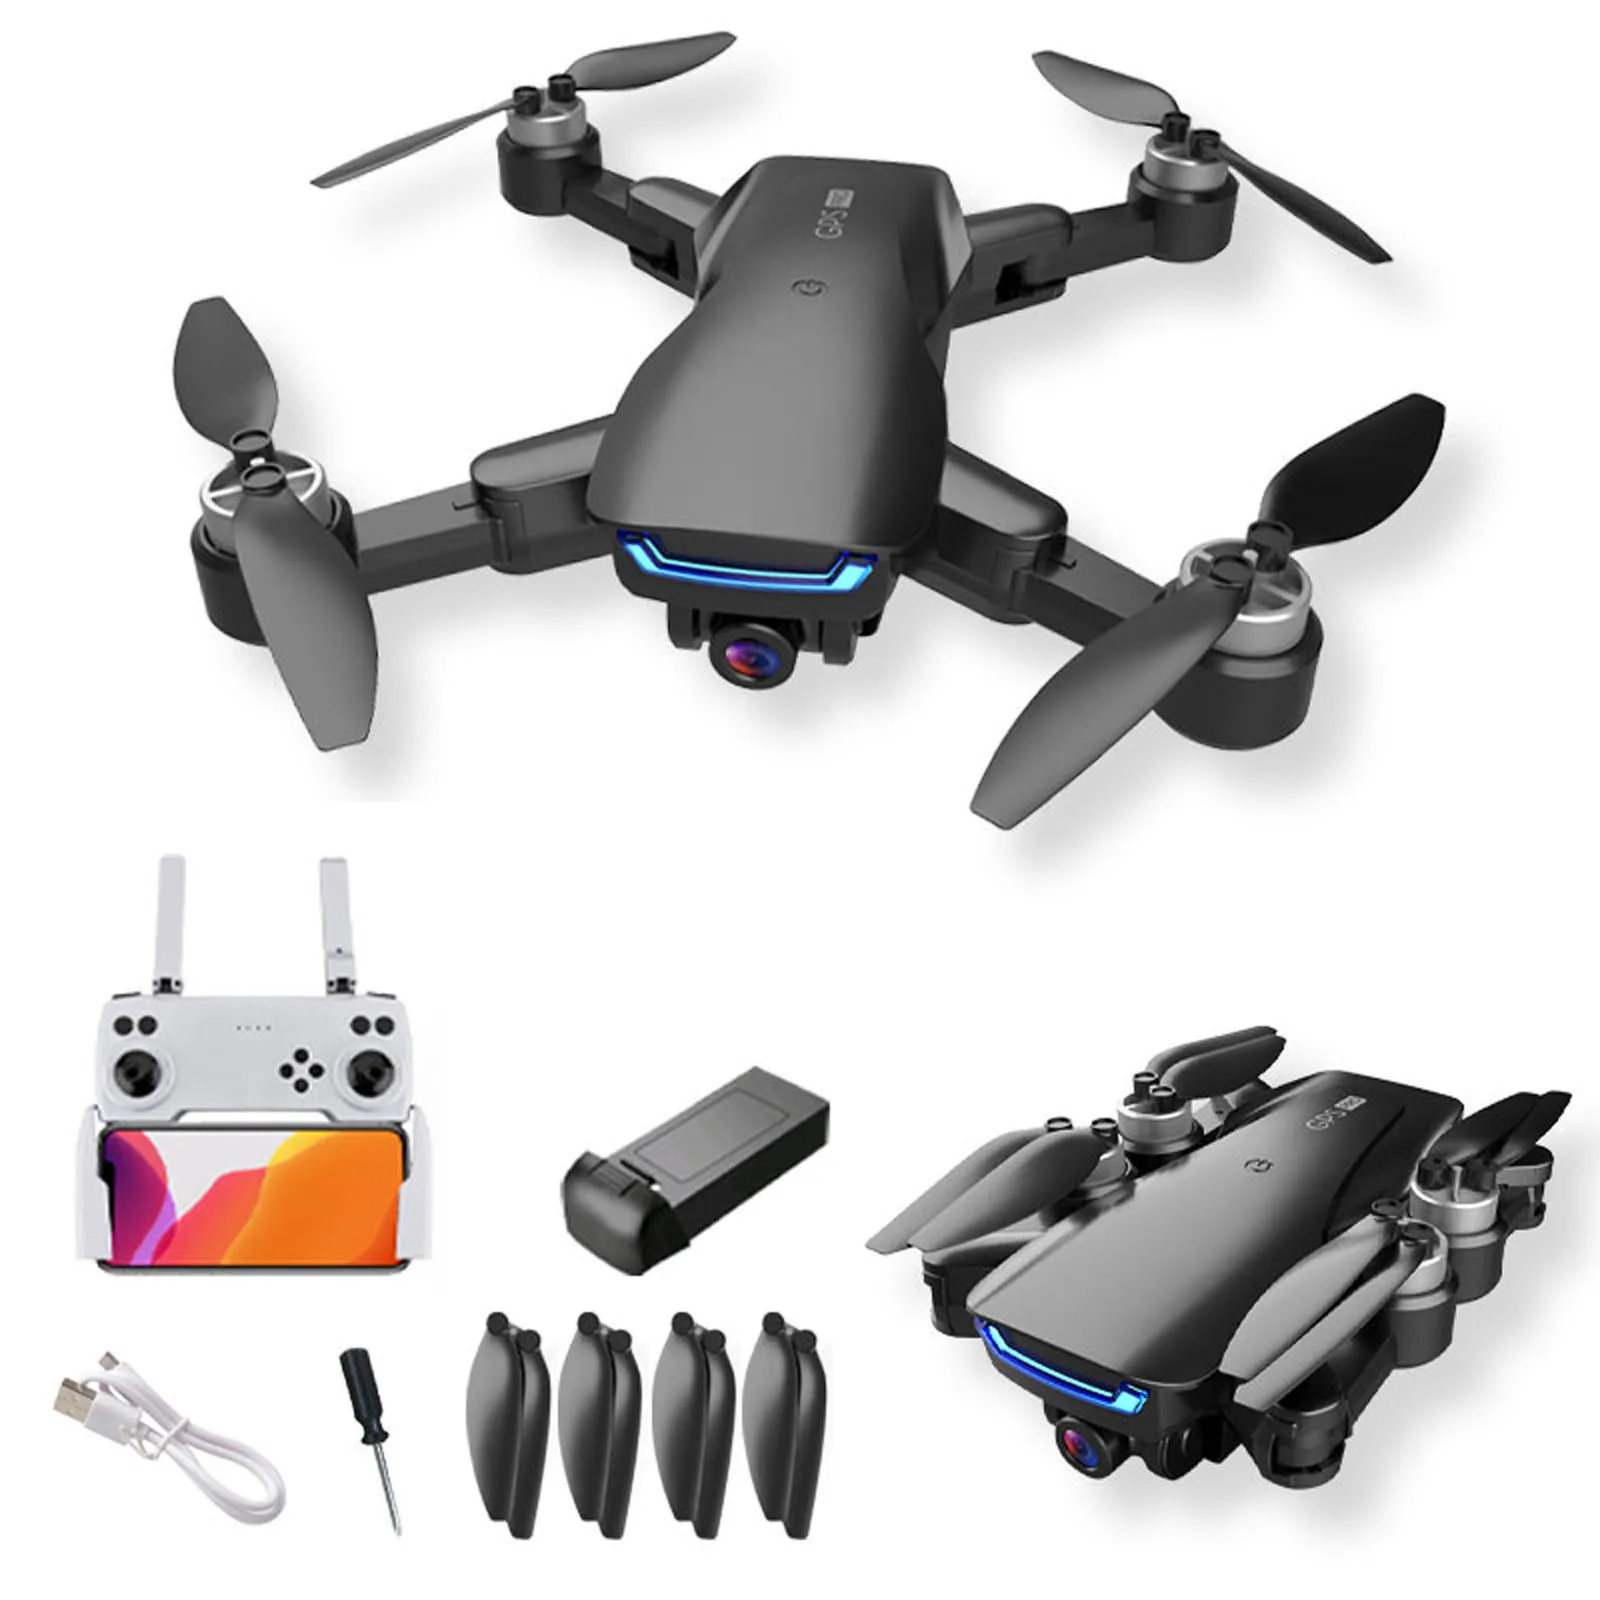 

Eachine E520s Rc Quadcopter Drone Helicopter With 4k Profesional Hd Camera 5g Wifi Fpv Racing Gps Wide Angle Foldable Toys Rtf